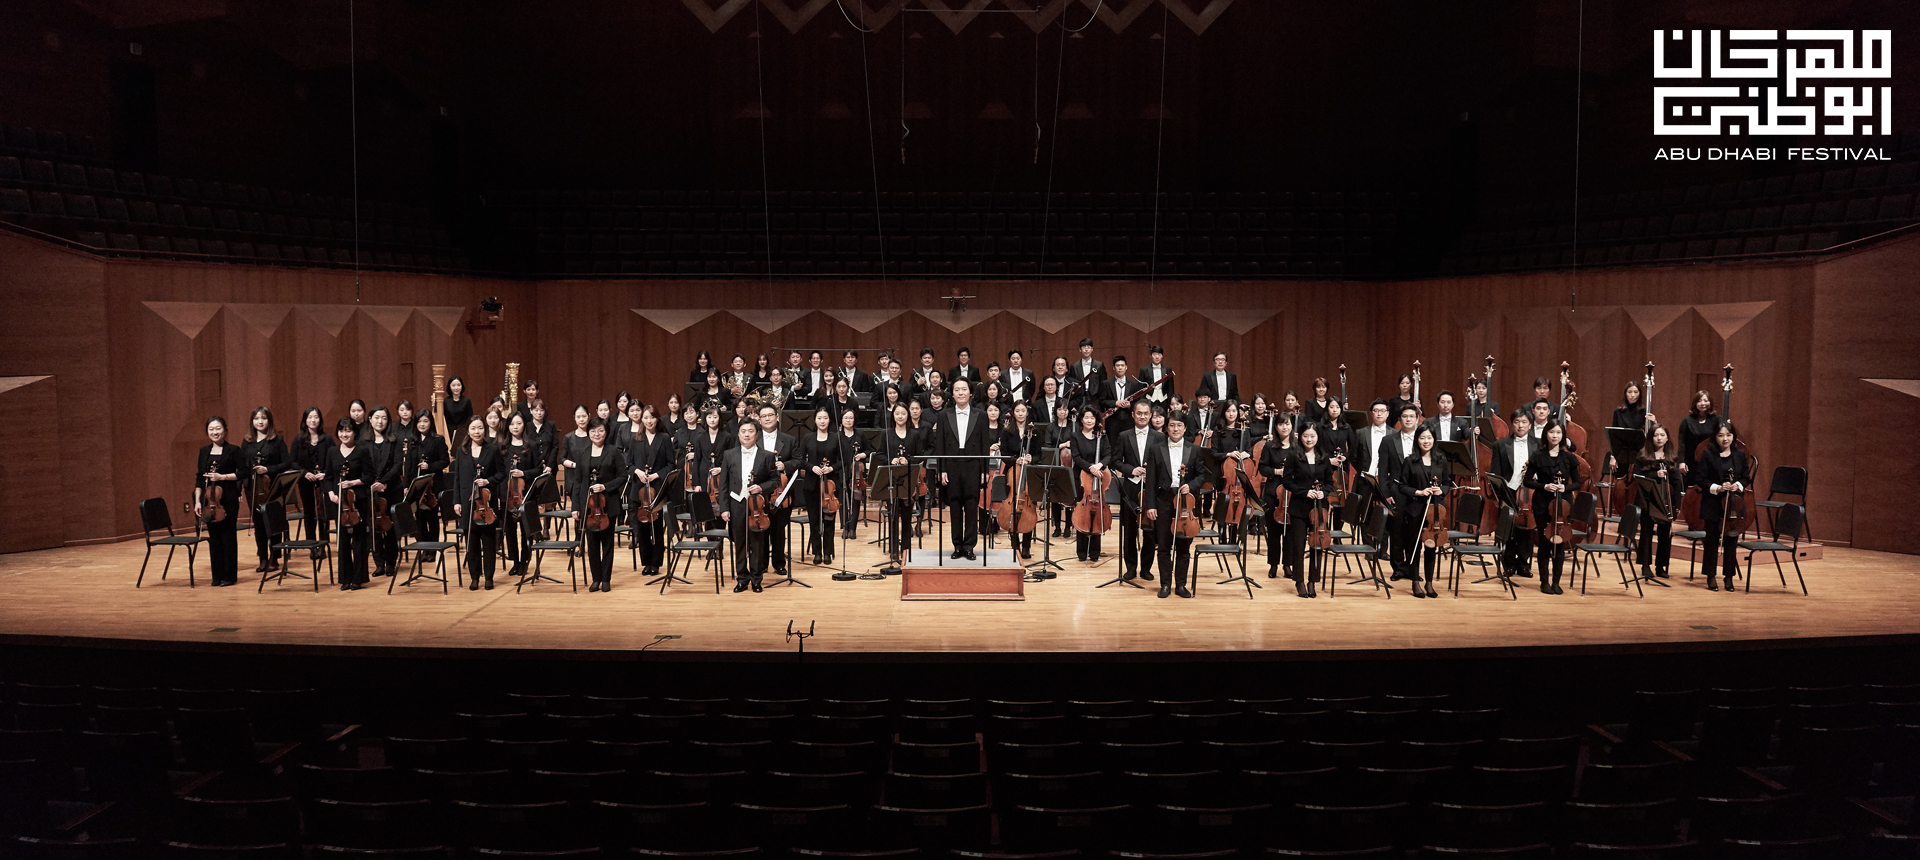 KOREAN SYMPHONY ORCHESTRA CONDUCTED BY MAESTRO CHI-YONG CHUNG, FEATURING PIANIST JAE-HYUCK CHO				